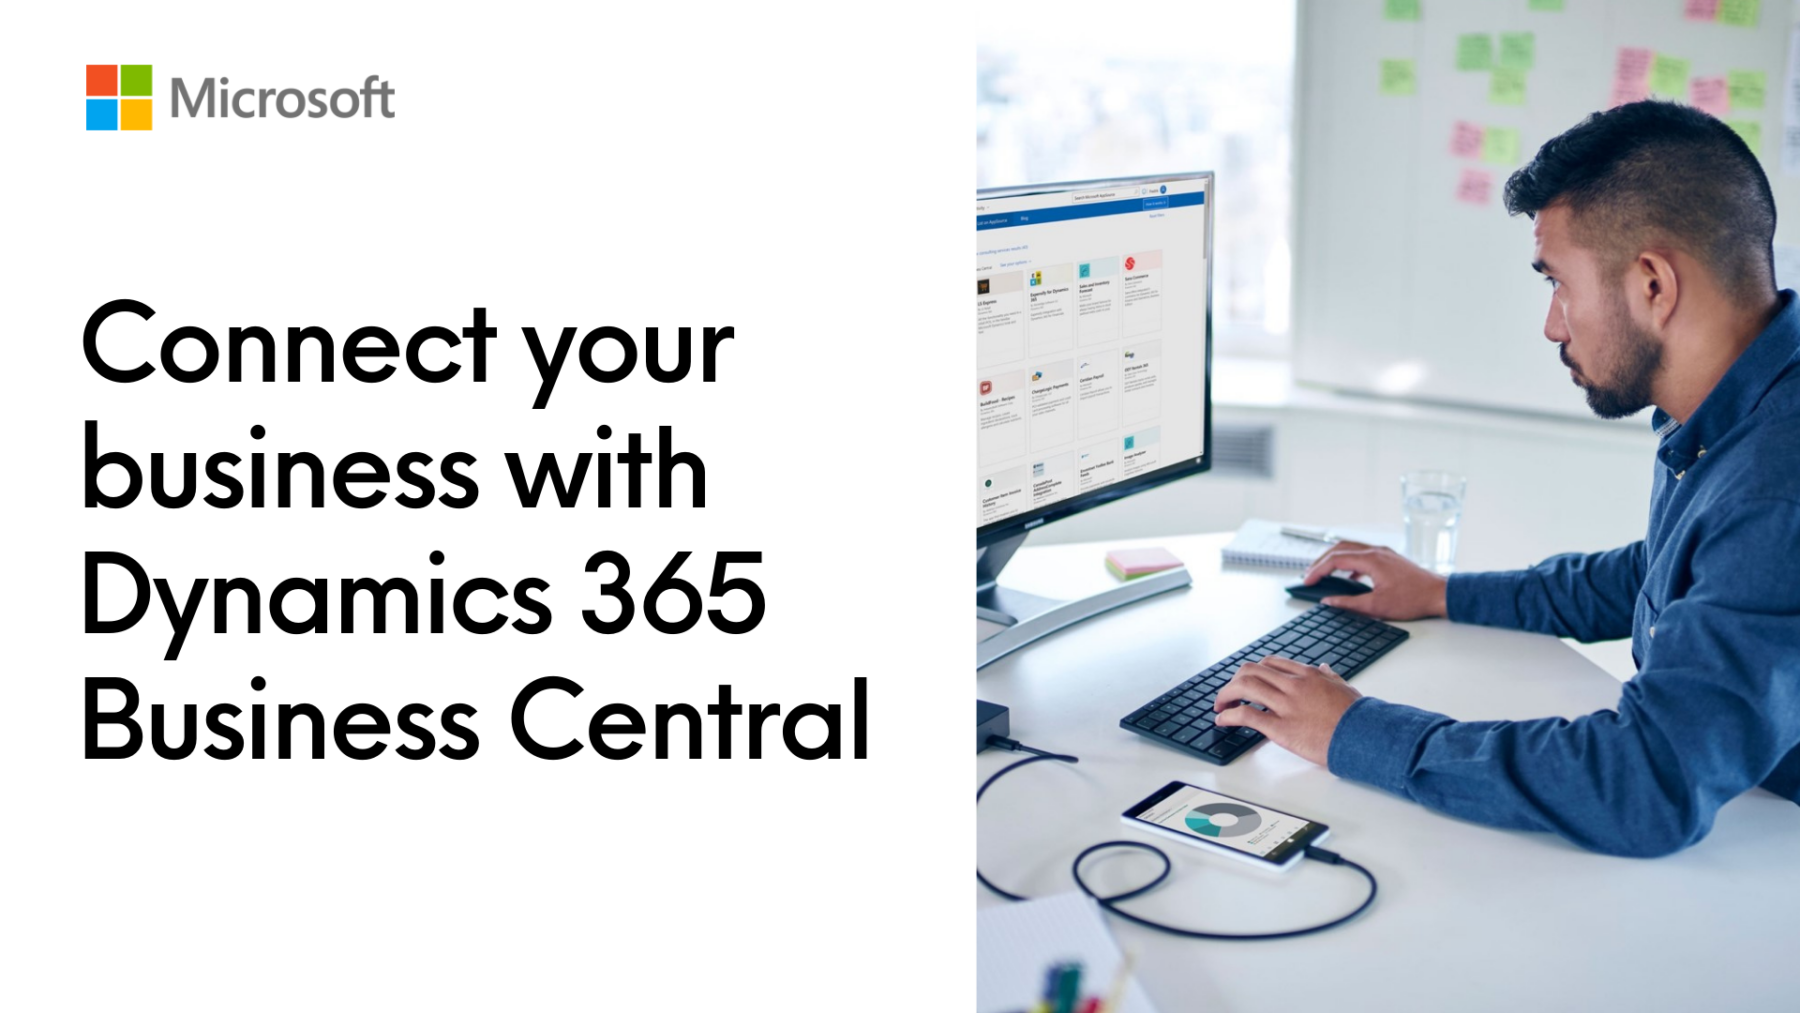 Connect your business with Dynamics 365 Business Central